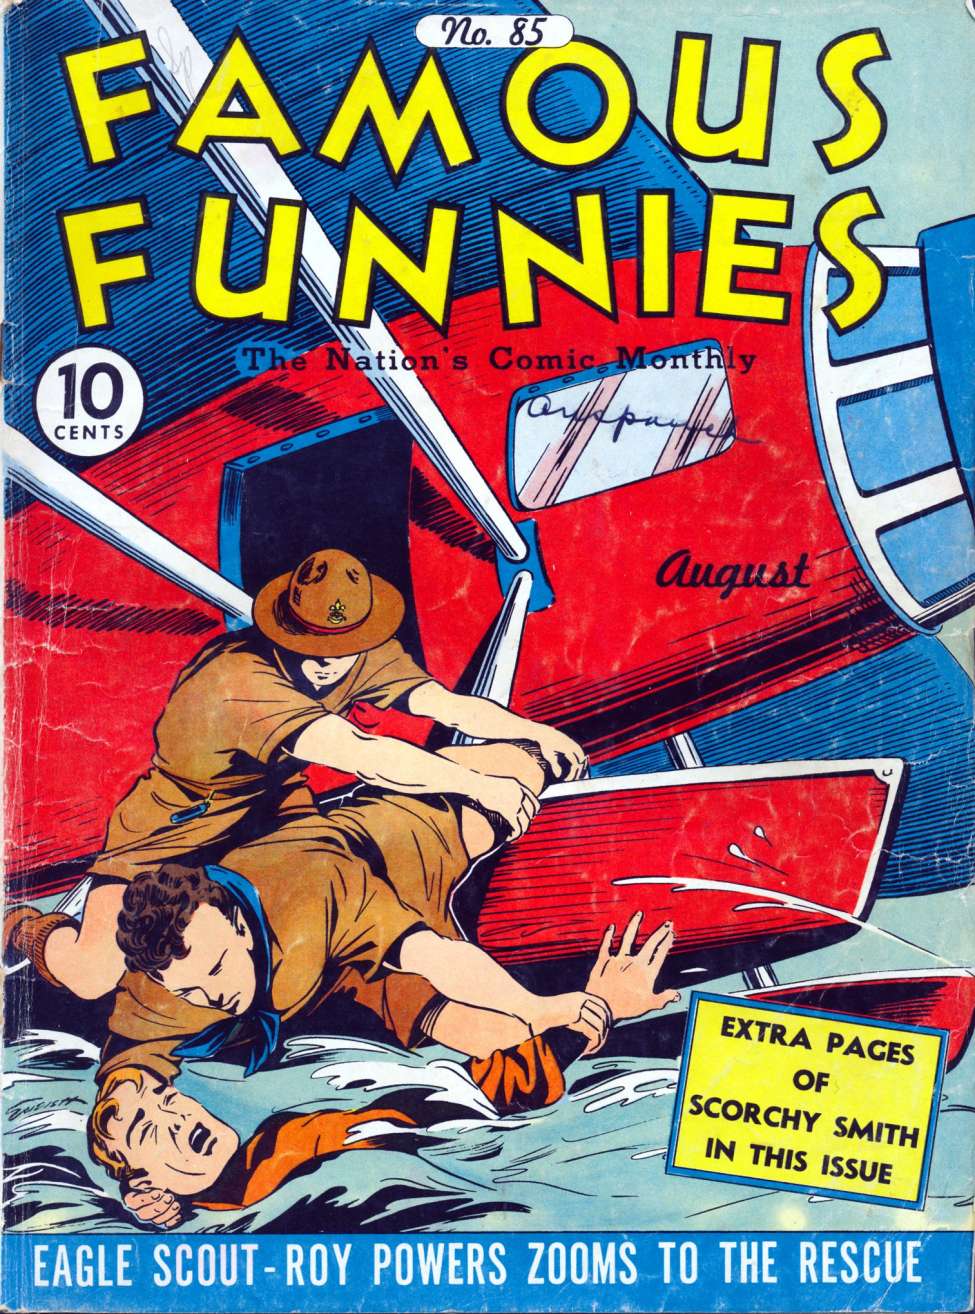 Book Cover For Famous Funnies 85 (alt) - Version 2